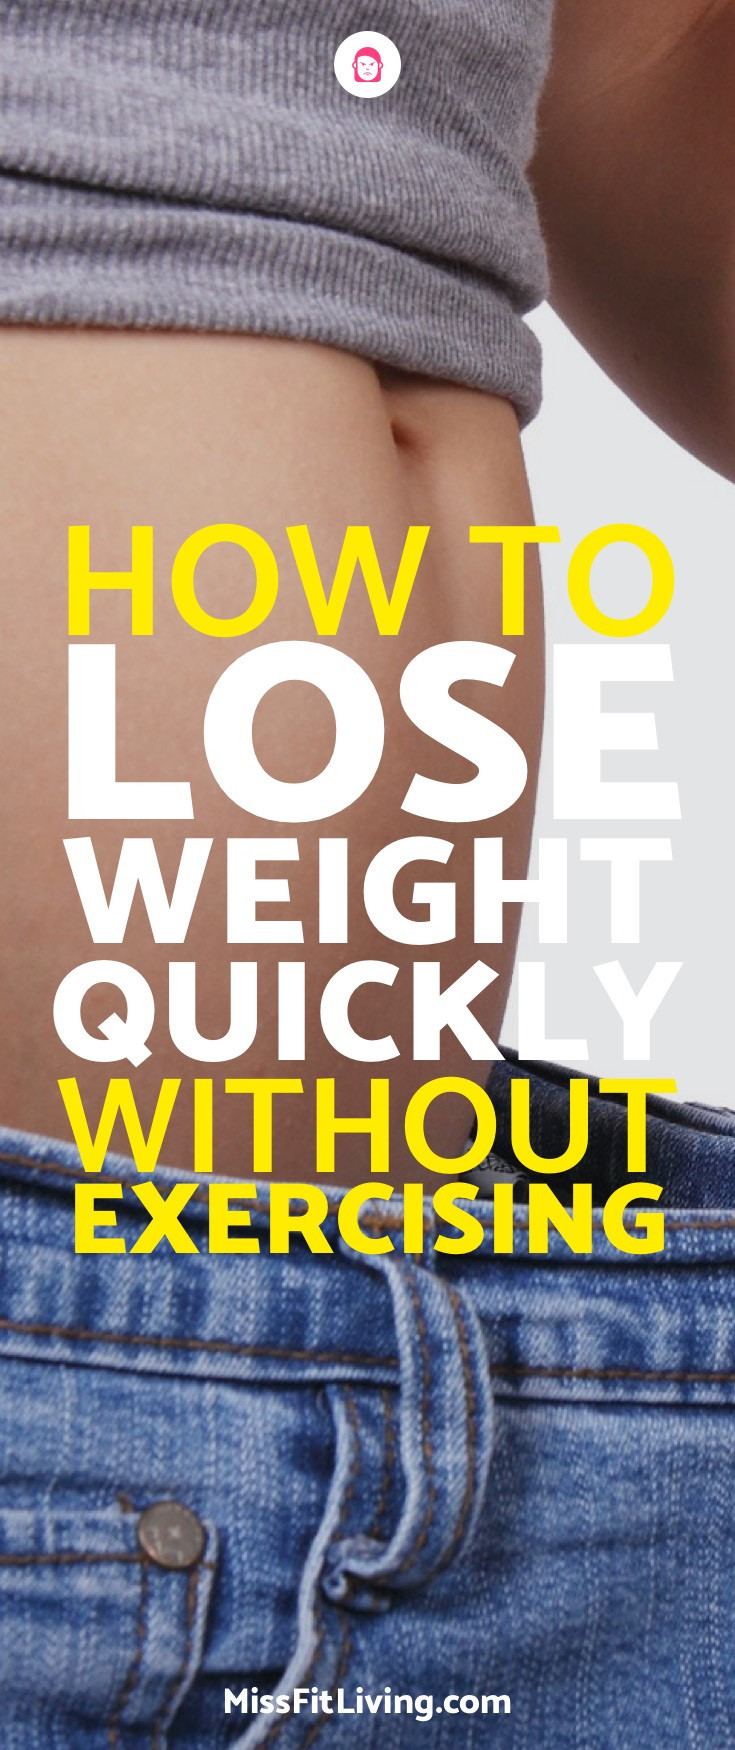 How To Lose Weight Quickly Without Exercise
 How to Lose Weight Quickly Without Exercise